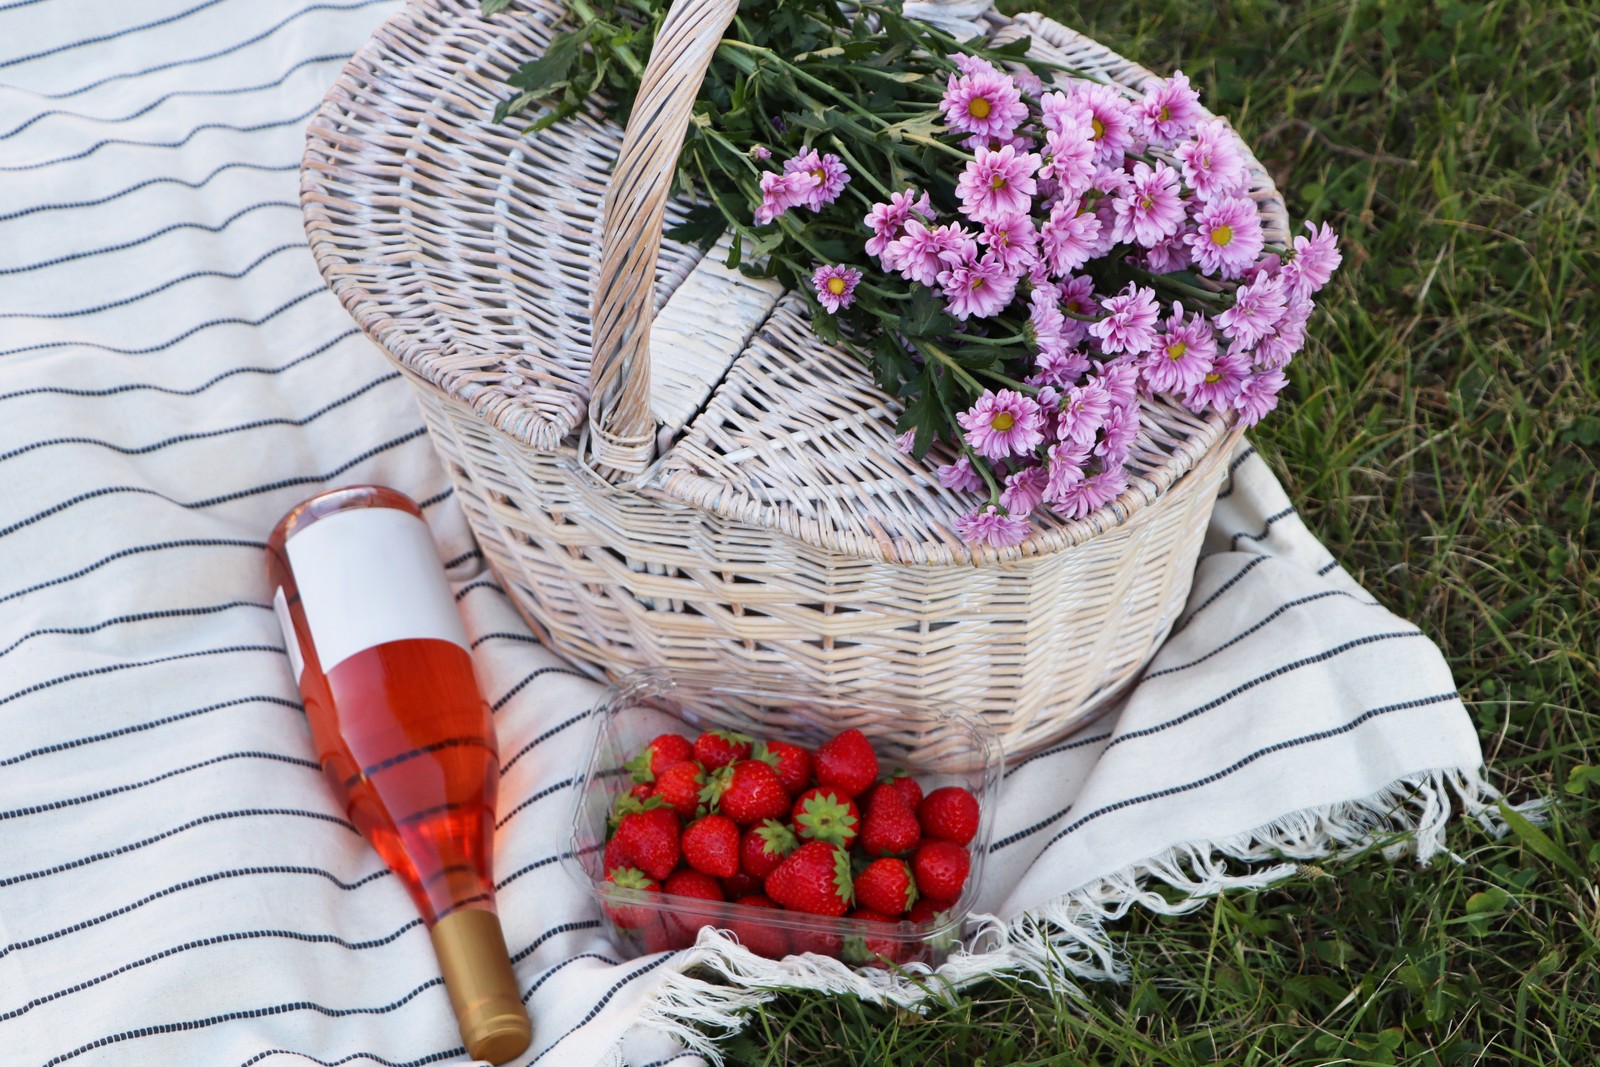 Photo of picnic basket, flowers, bottle of wine and strawberries on blanket outdoors